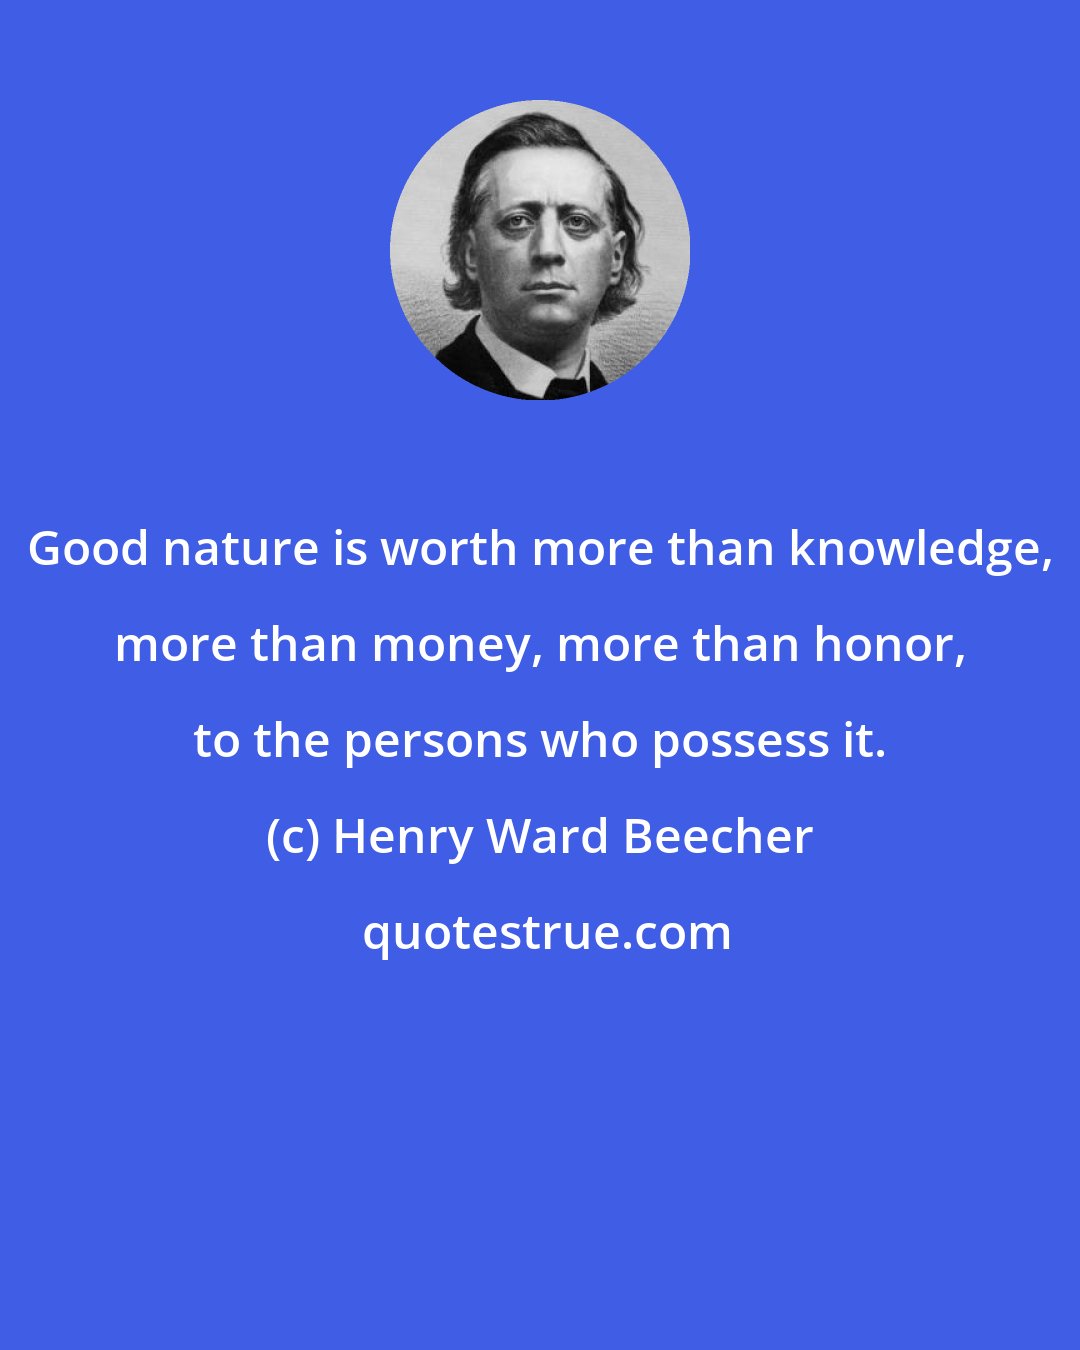 Henry Ward Beecher: Good nature is worth more than knowledge, more than money, more than honor, to the persons who possess it.